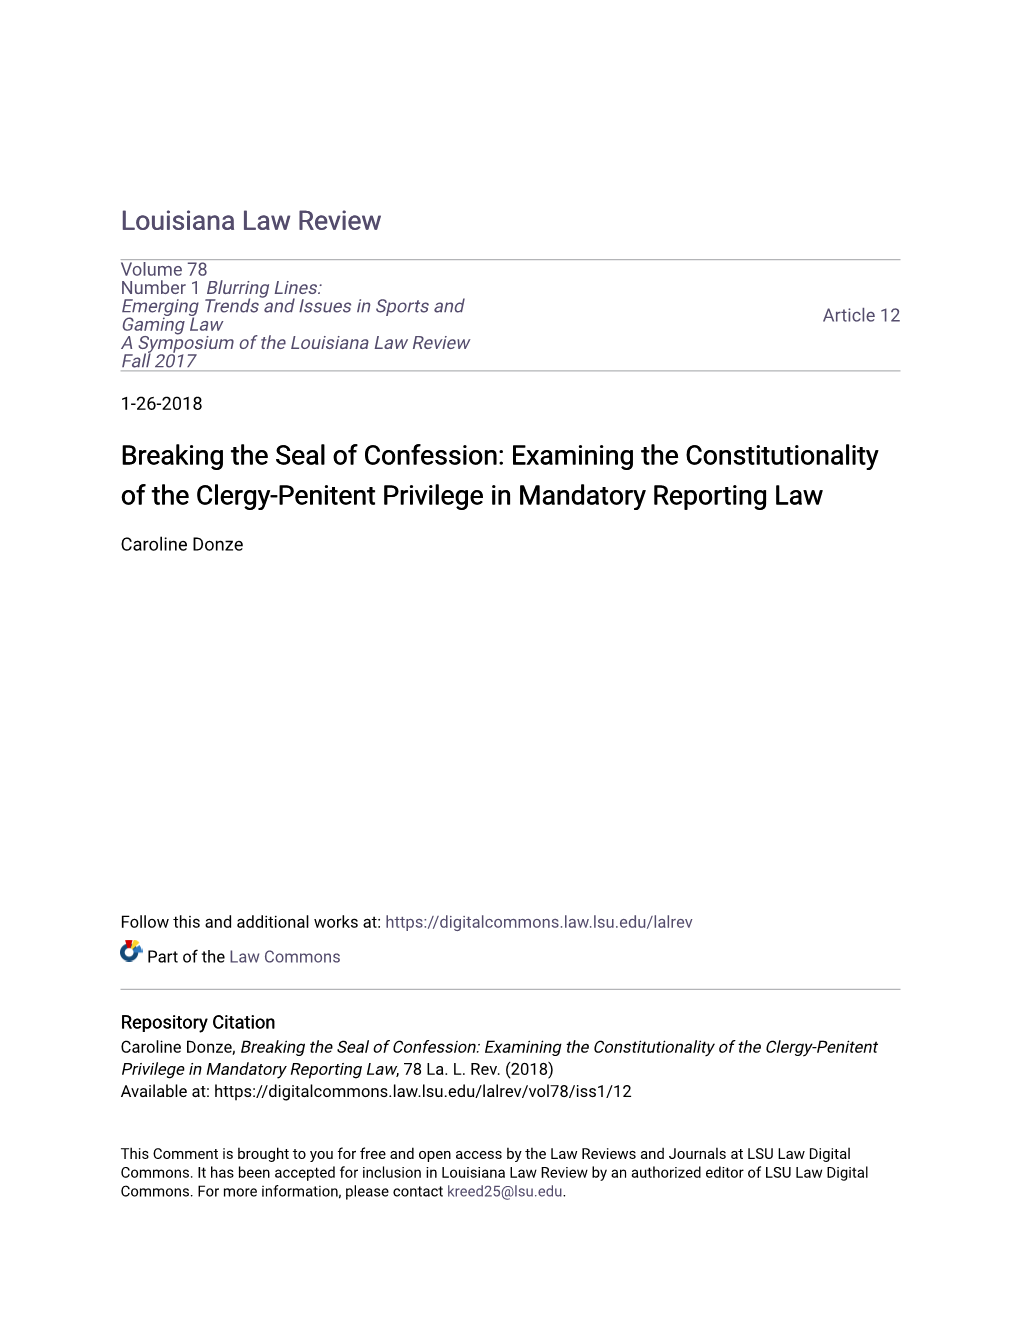 Examining the Constitutionality of the Clergy-Penitent Privilege in Mandatory Reporting Law